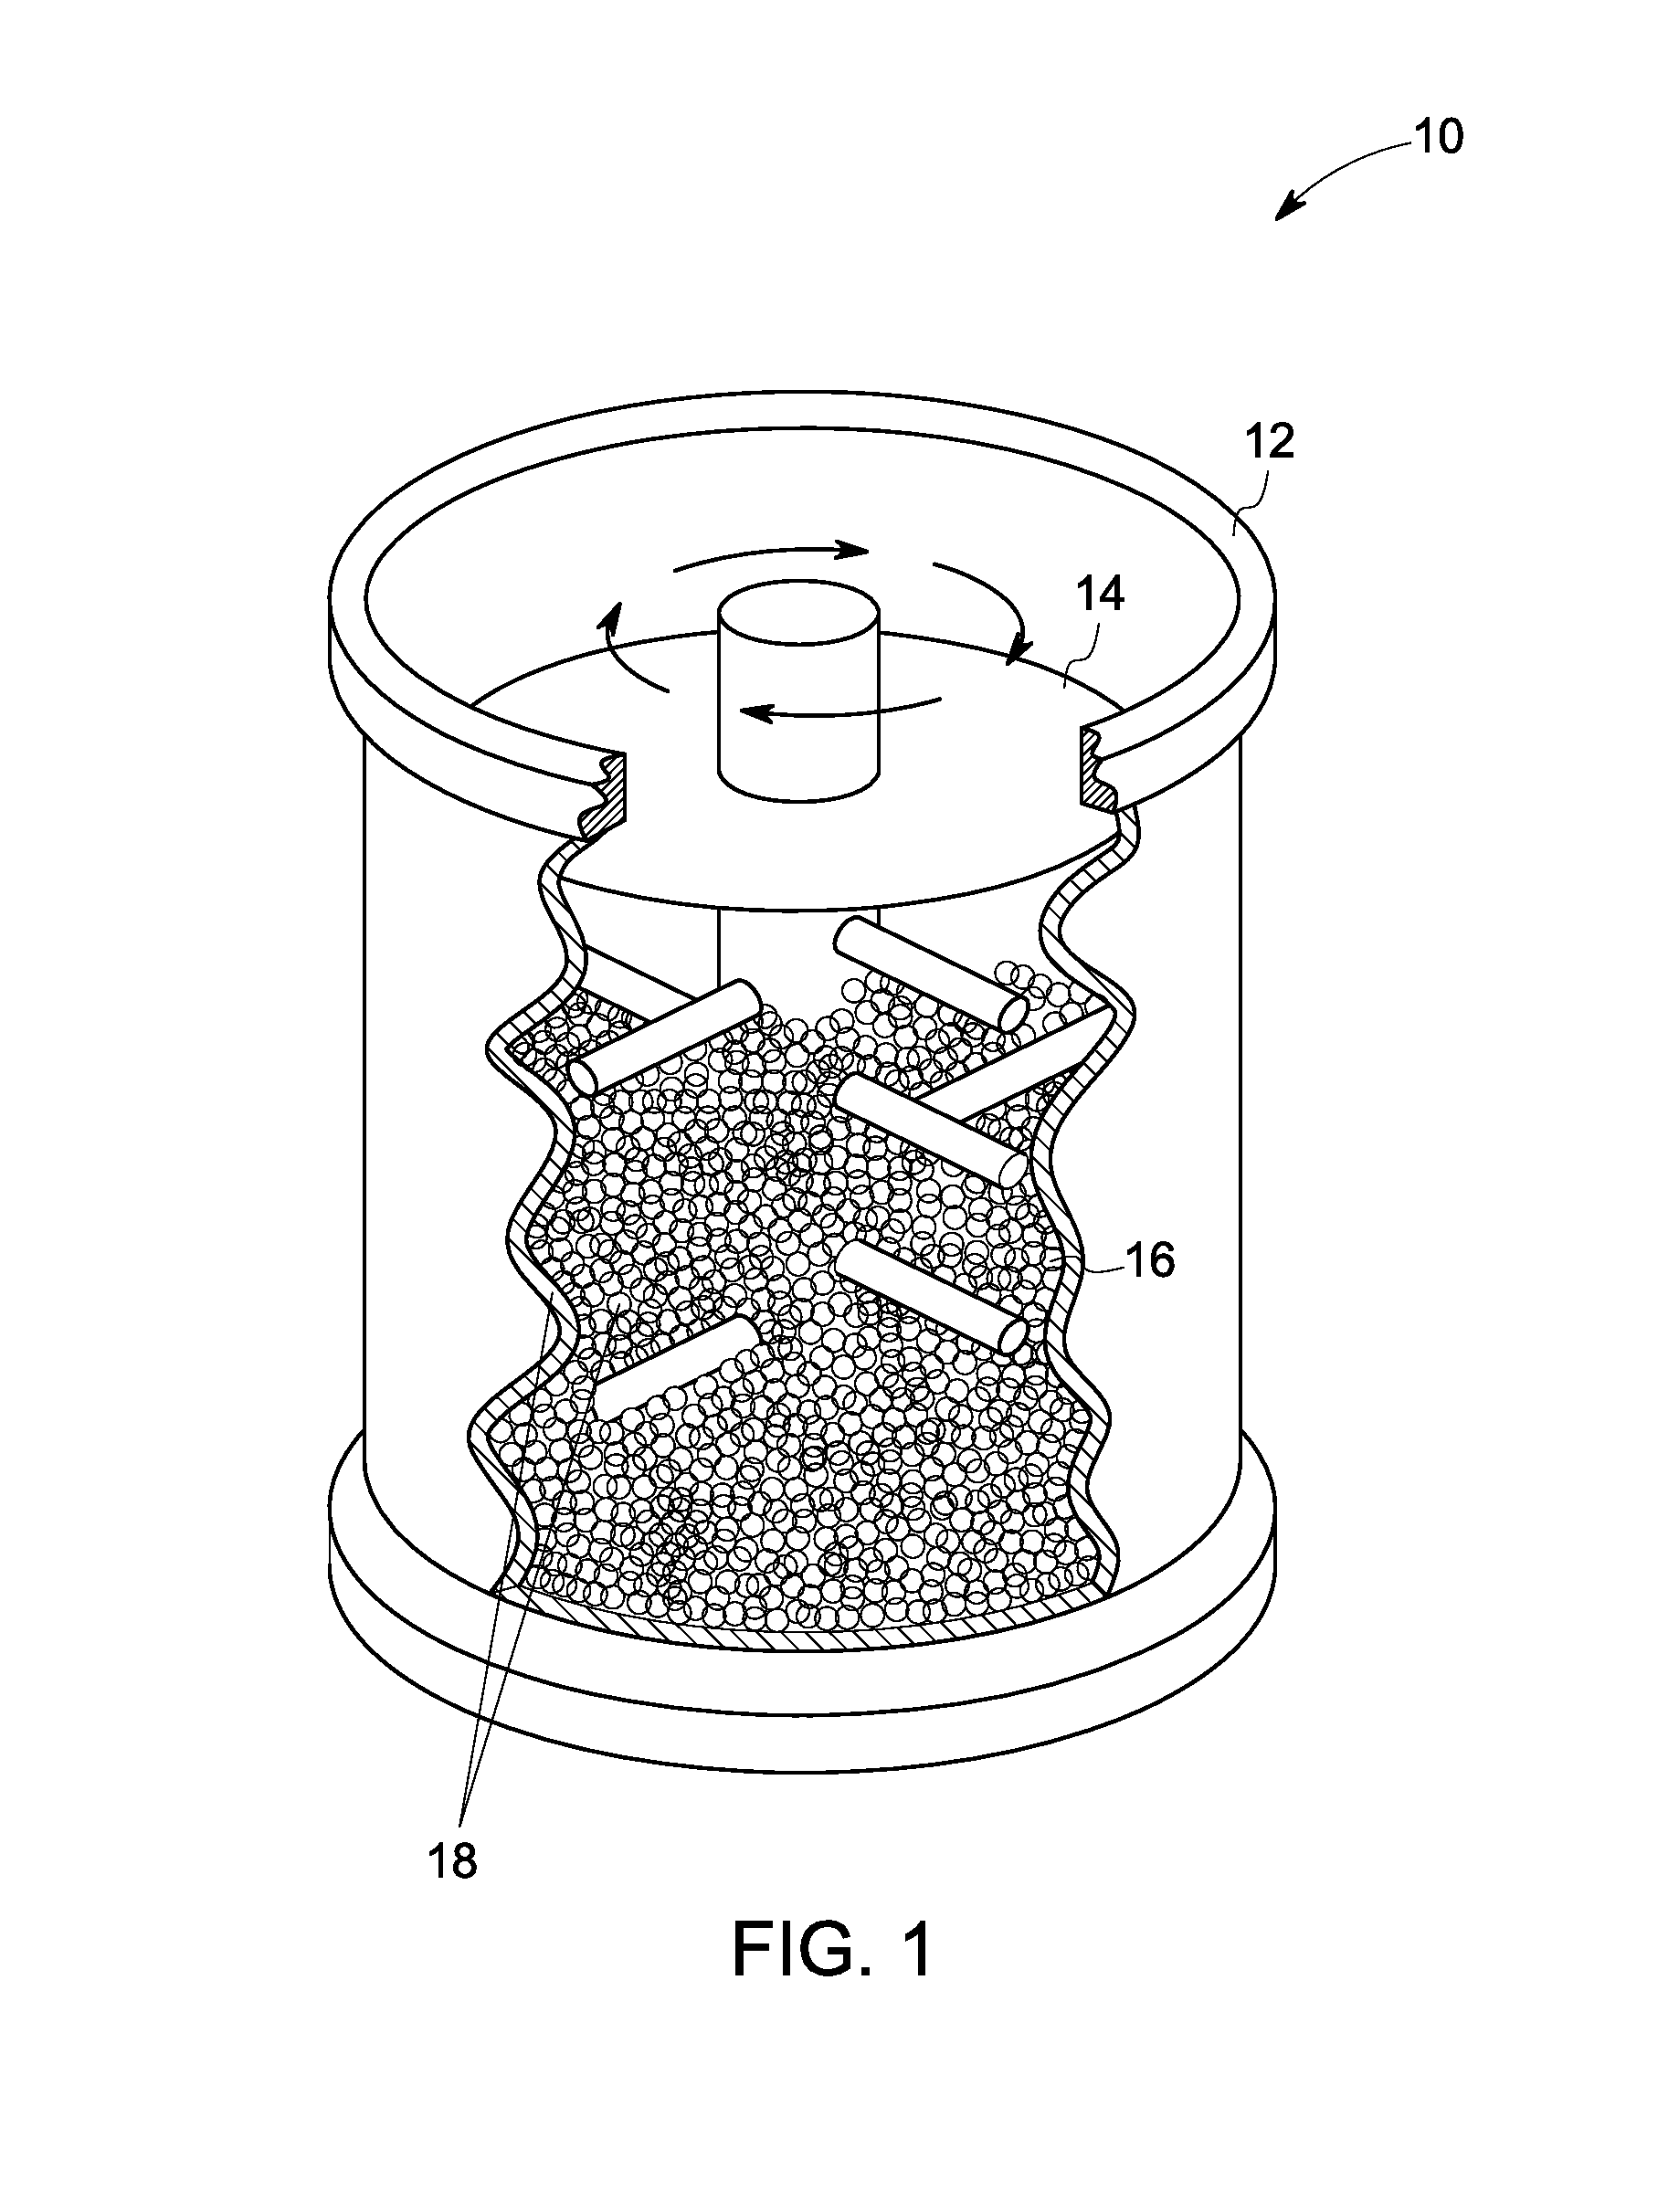 System and method of forming nanostructured ferritic alloy